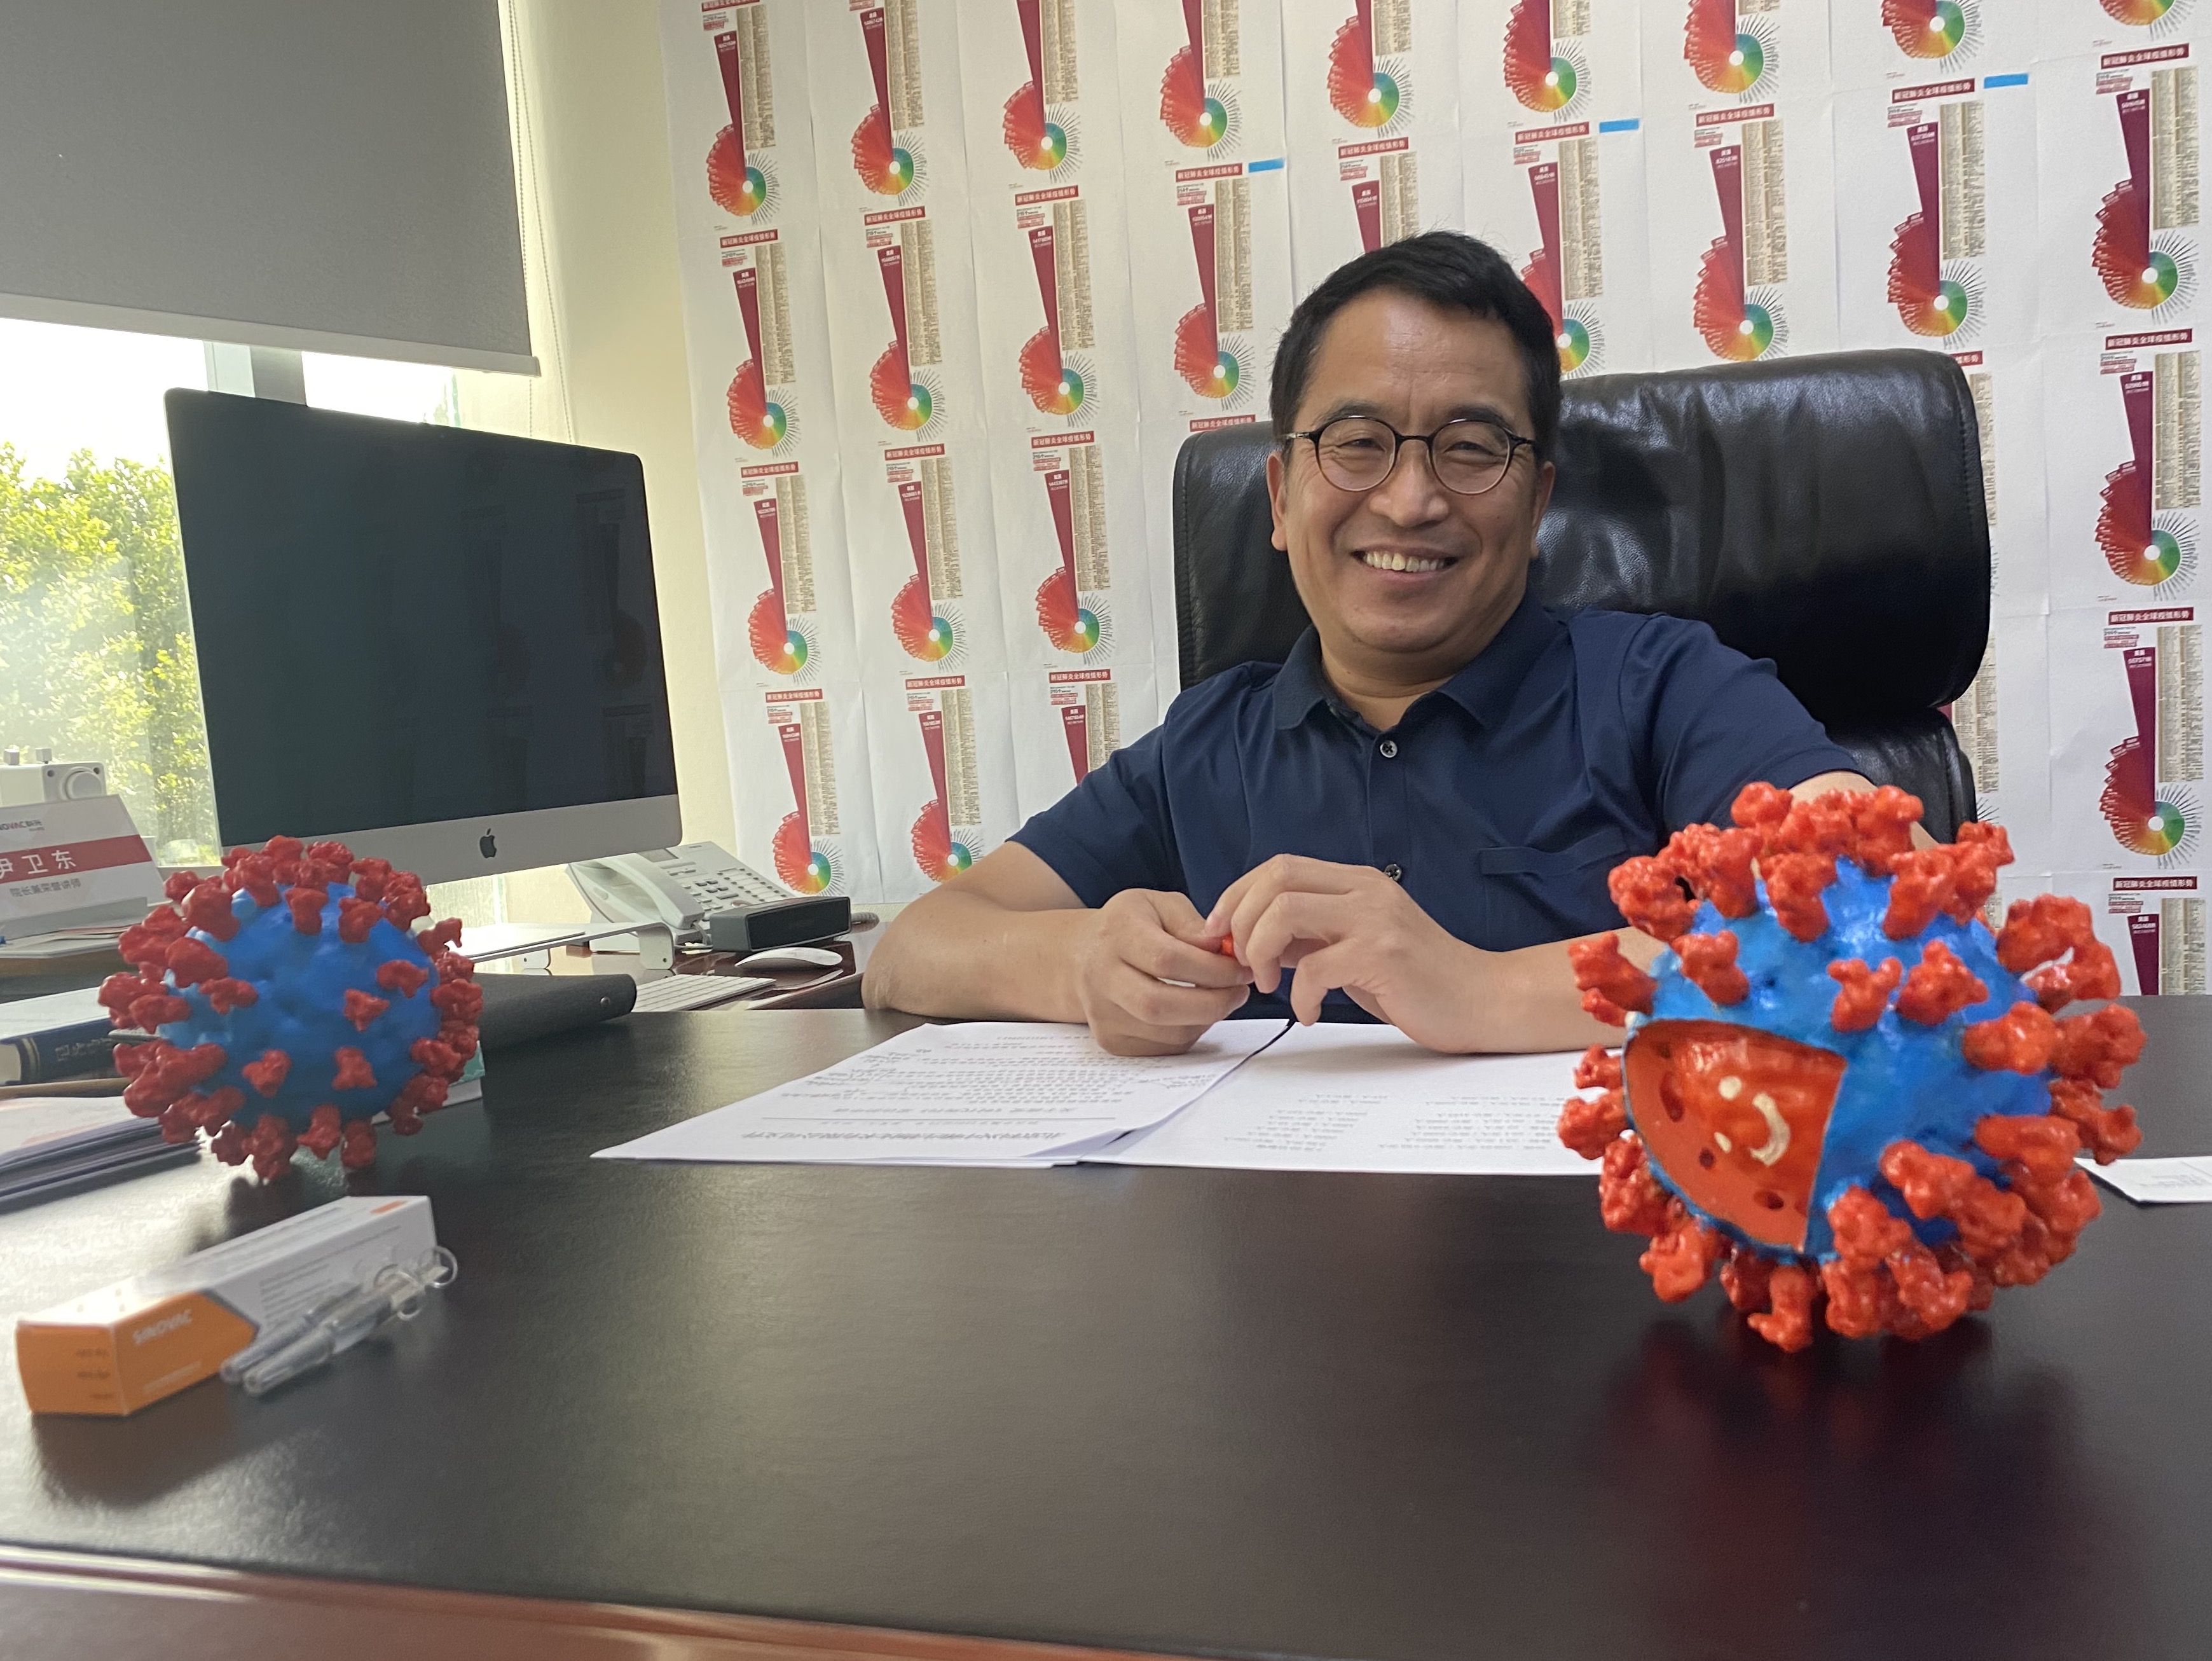 SinoVac CEO Yin Weidong in his Beijing office on Tuesday, July 21, 2020. (Charlie Campbell)